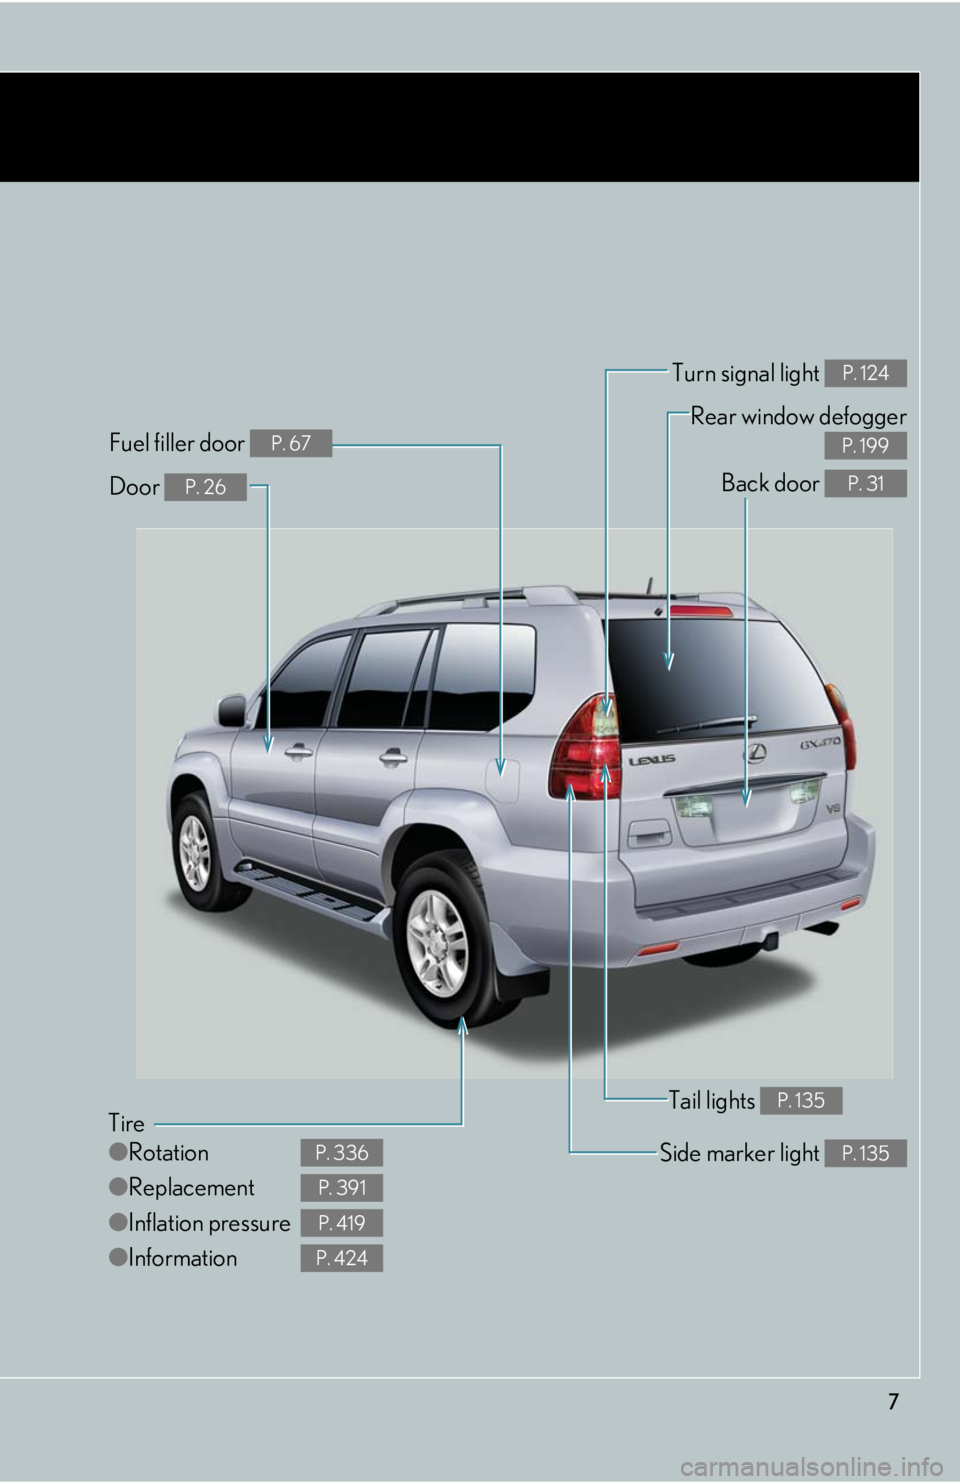 Lexus GX470 2008  Opening, closing and locking the doors / LEXUS 2008 GX470 OWNERS MANUAL (OM60D82U) 7
Tire
●Rotation
● Replacement
● Inflation pressure
● Information
P. 336
P. 391
P. 419
P. 424
Tail lights P. 135
Side marker light P. 135
Back door P. 31
Rear window defogger
 
P. 199
Door P. 